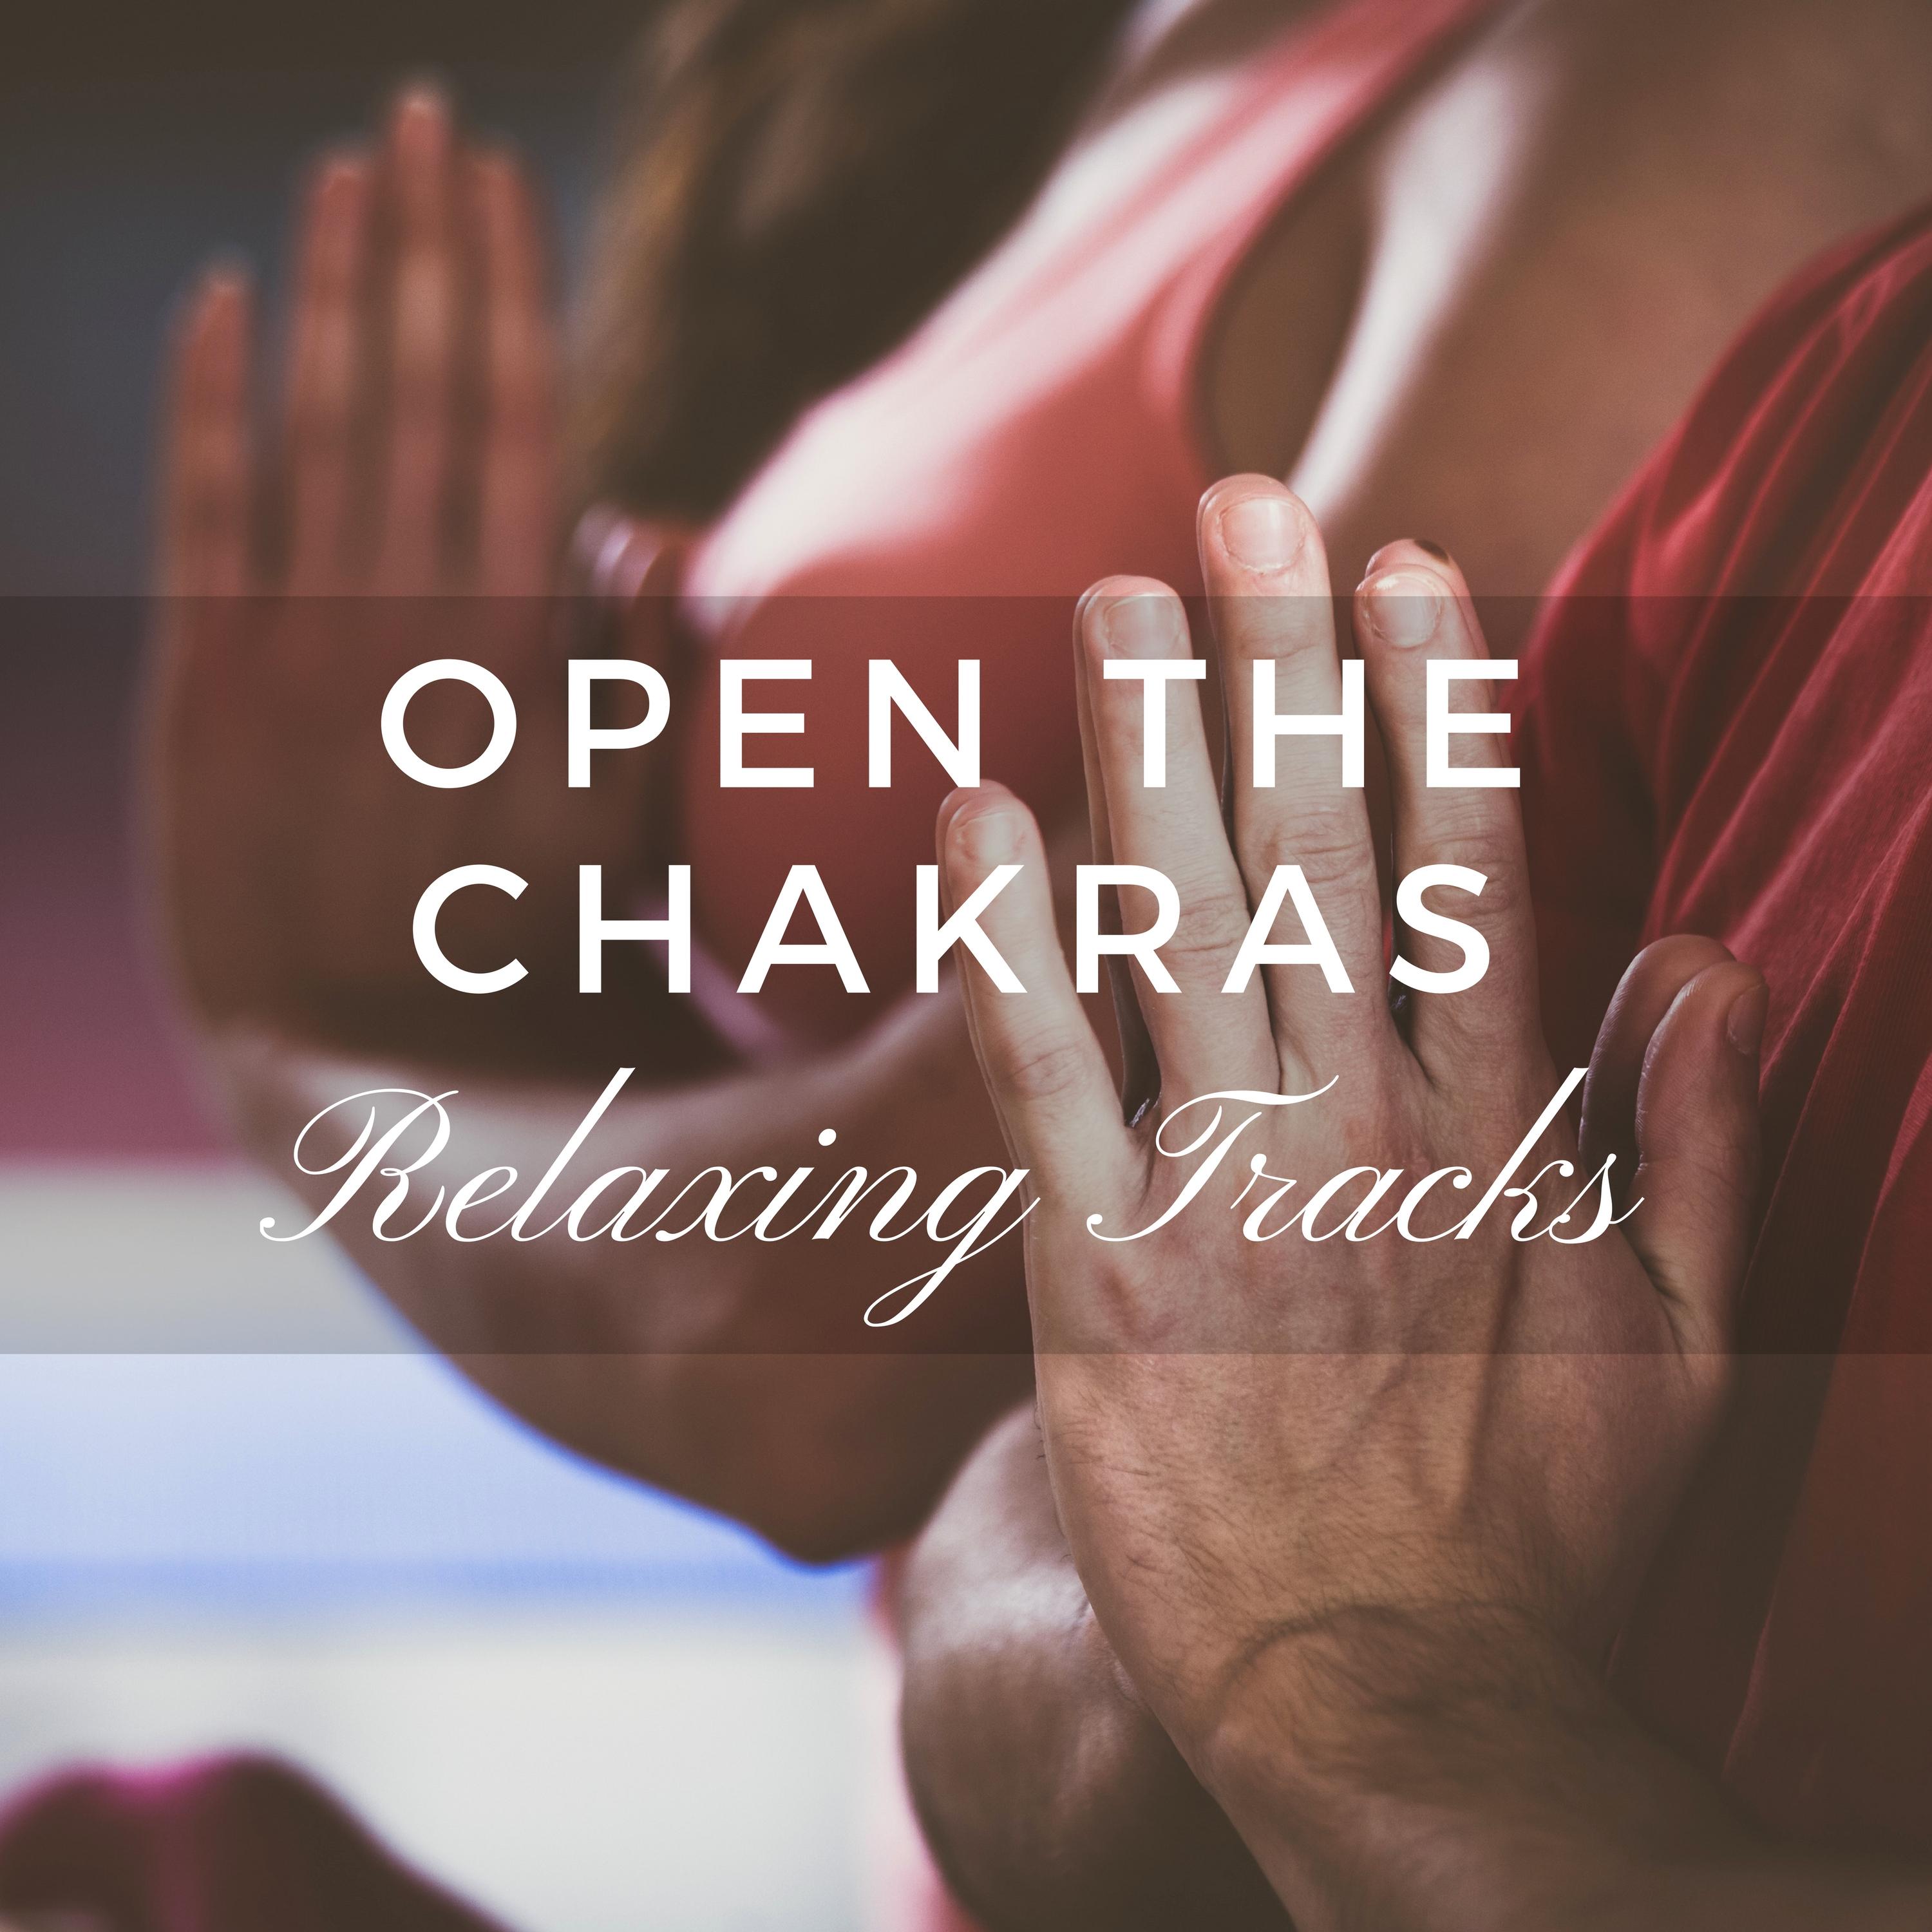 Open the Chakras - Relaxing Tracks, Express the Inner Light, Sounds of Nature (Ocean Waves, Birds, Rain and Night Ambient)